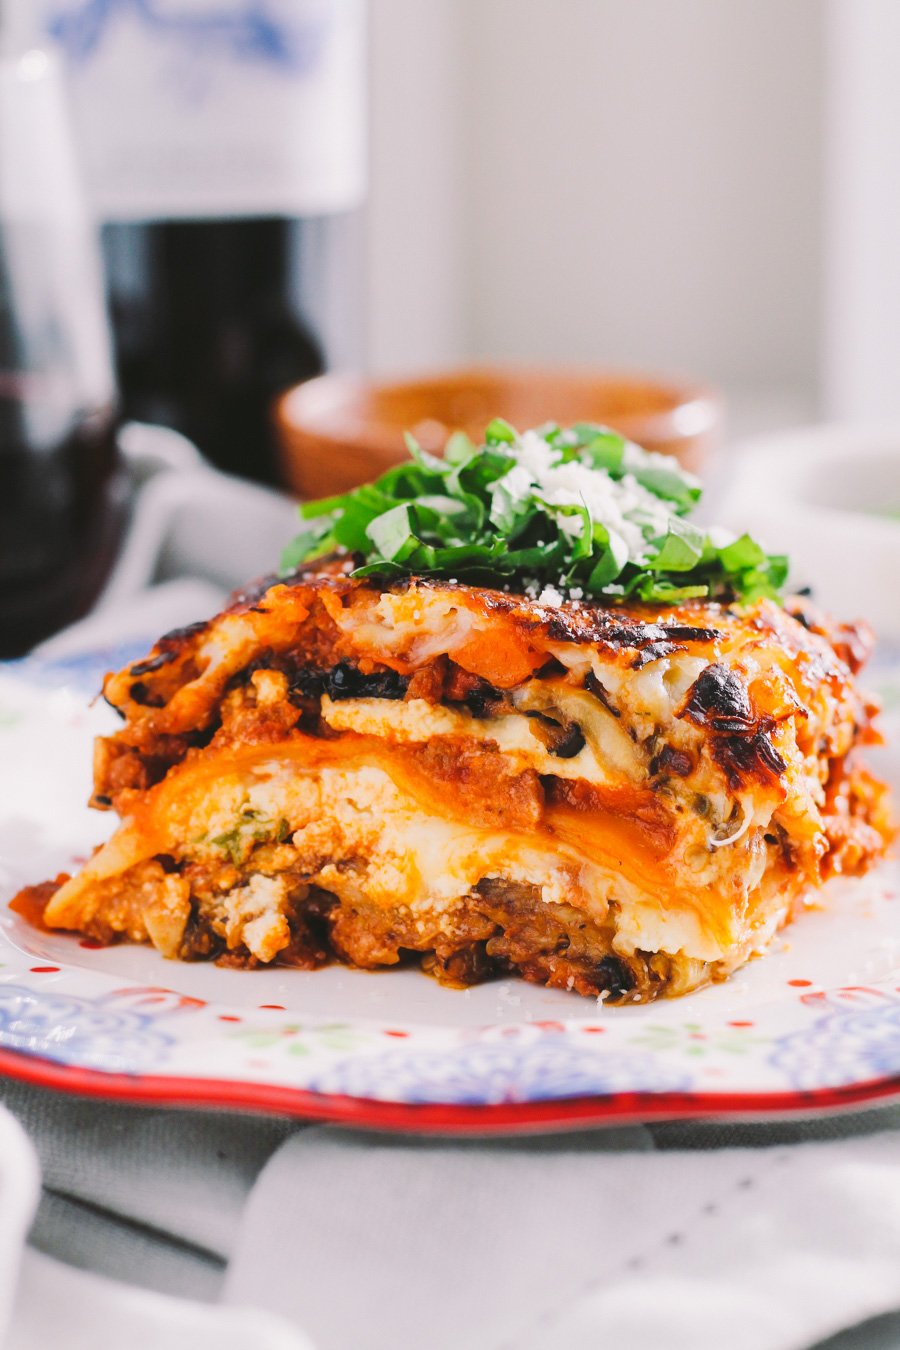 A side angle shot of eggplant lasagna served on a colorful patterned plate. The plate sits atop a white and gray marble surface with a glass of red wine and a small wooden pinch bowl filled with grated parmesan cheese.